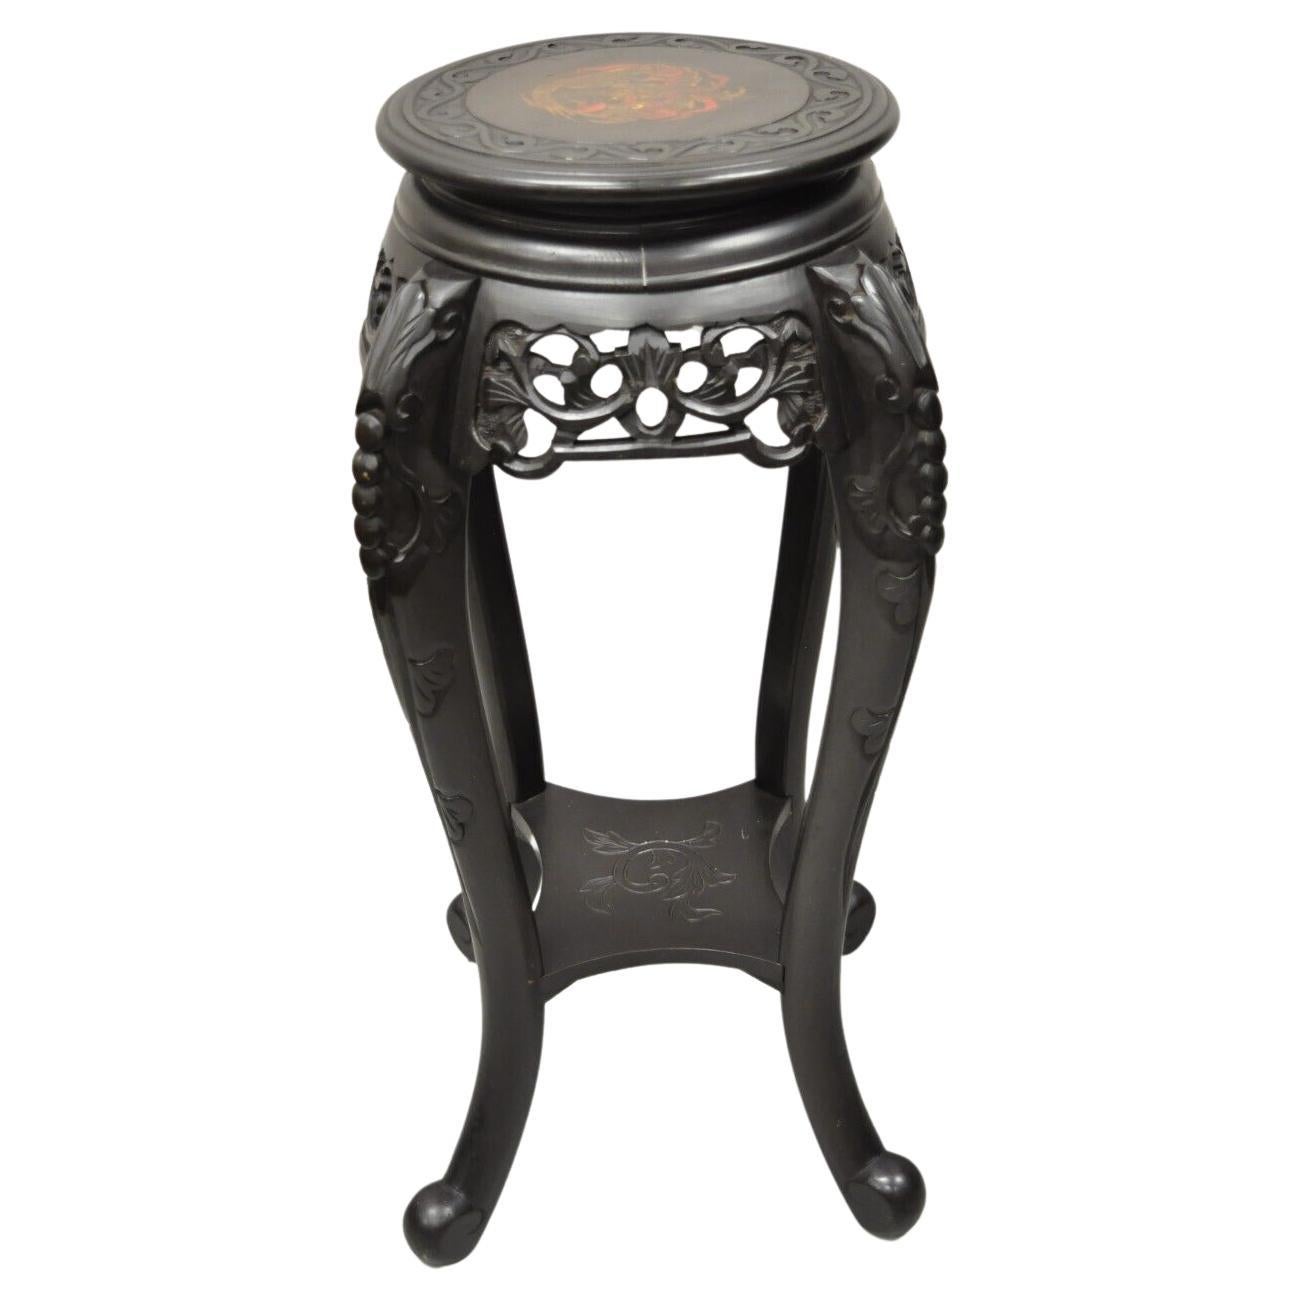 Japanese Carved Wood Black Ebonized Plant Stand Side Table Lacquer Top For Sale